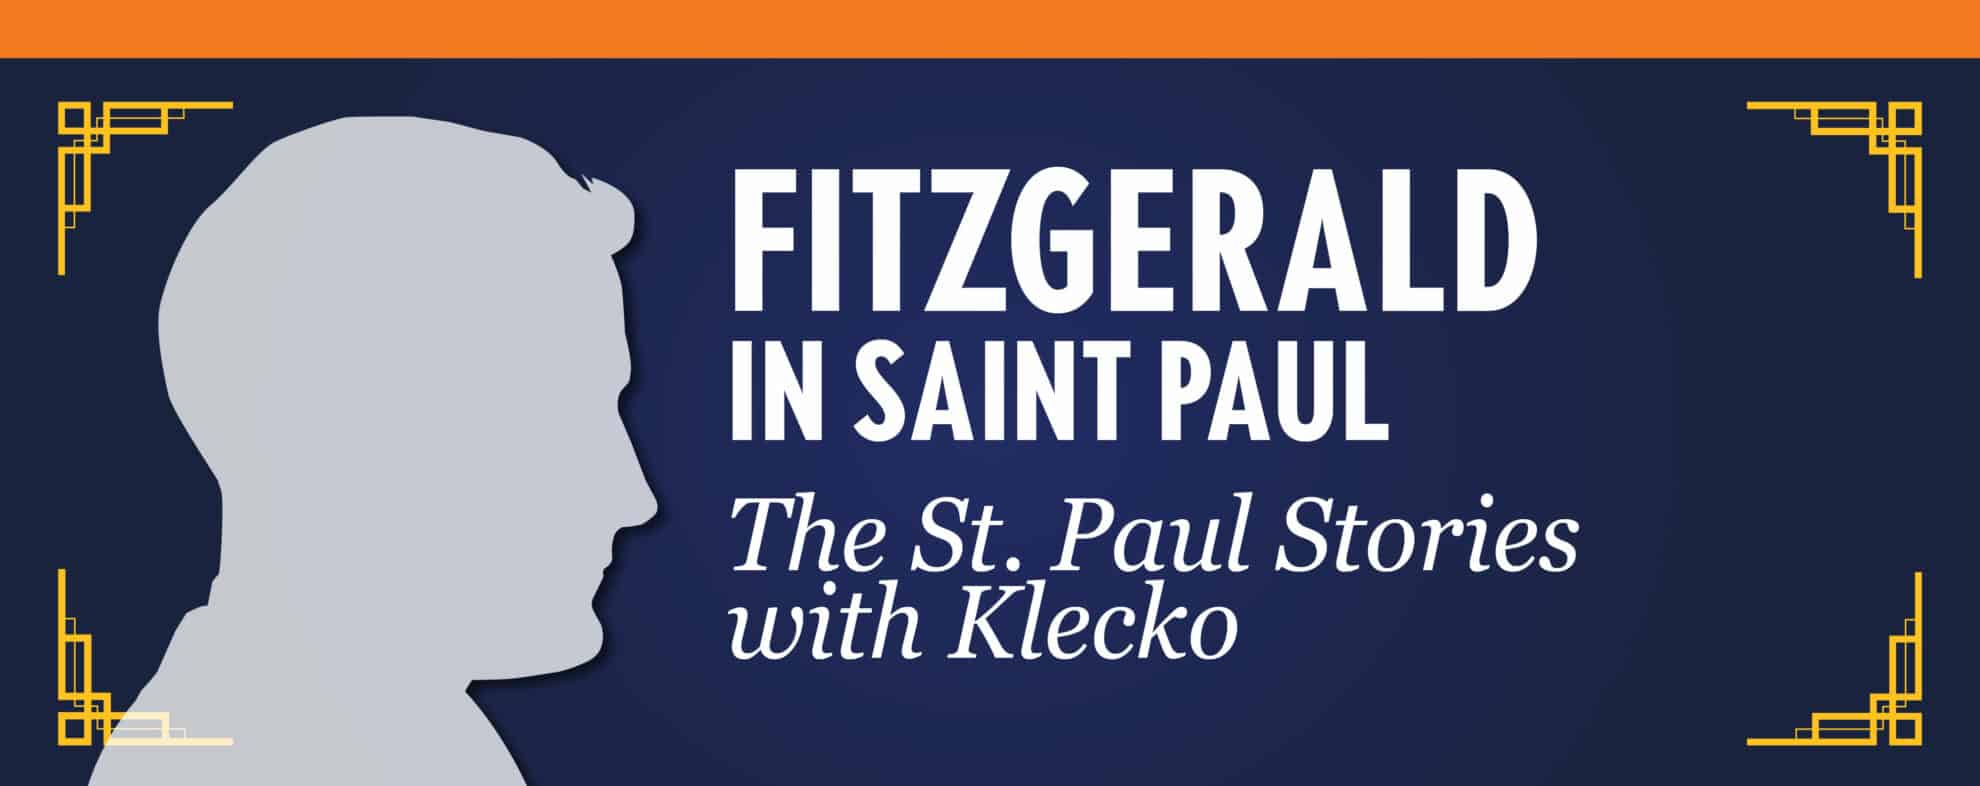 Fitzgerald In Saint Paul: The St. Paul Stories with Klecko @ Highland Park Library - Community Room